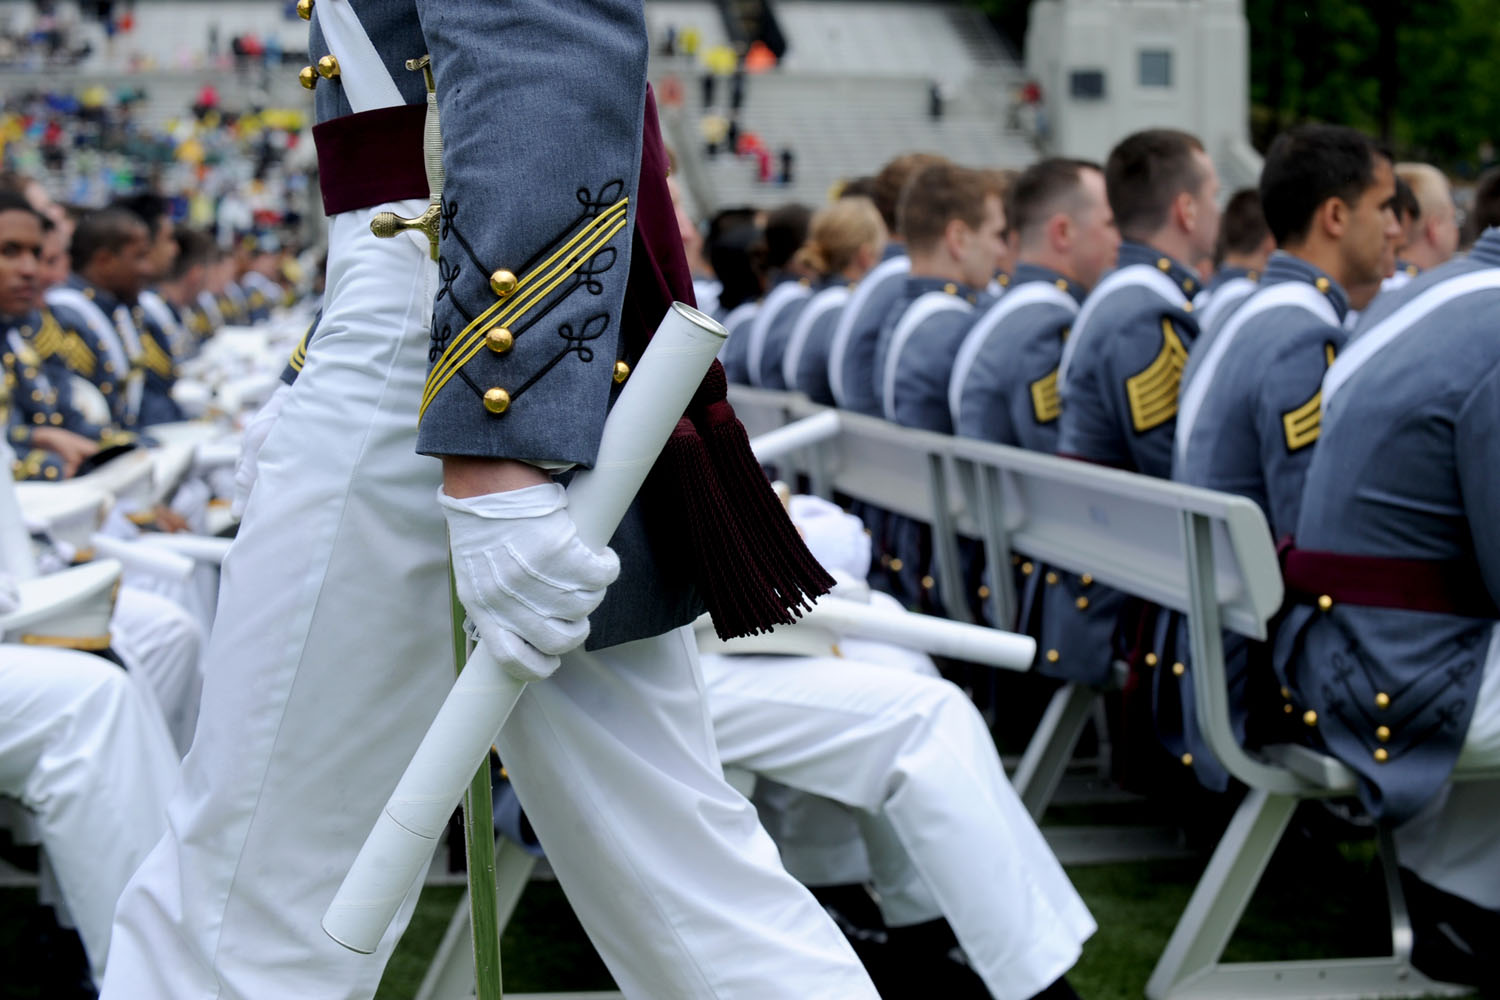 2013 Graduation and Commissioning Ceremony at West Point